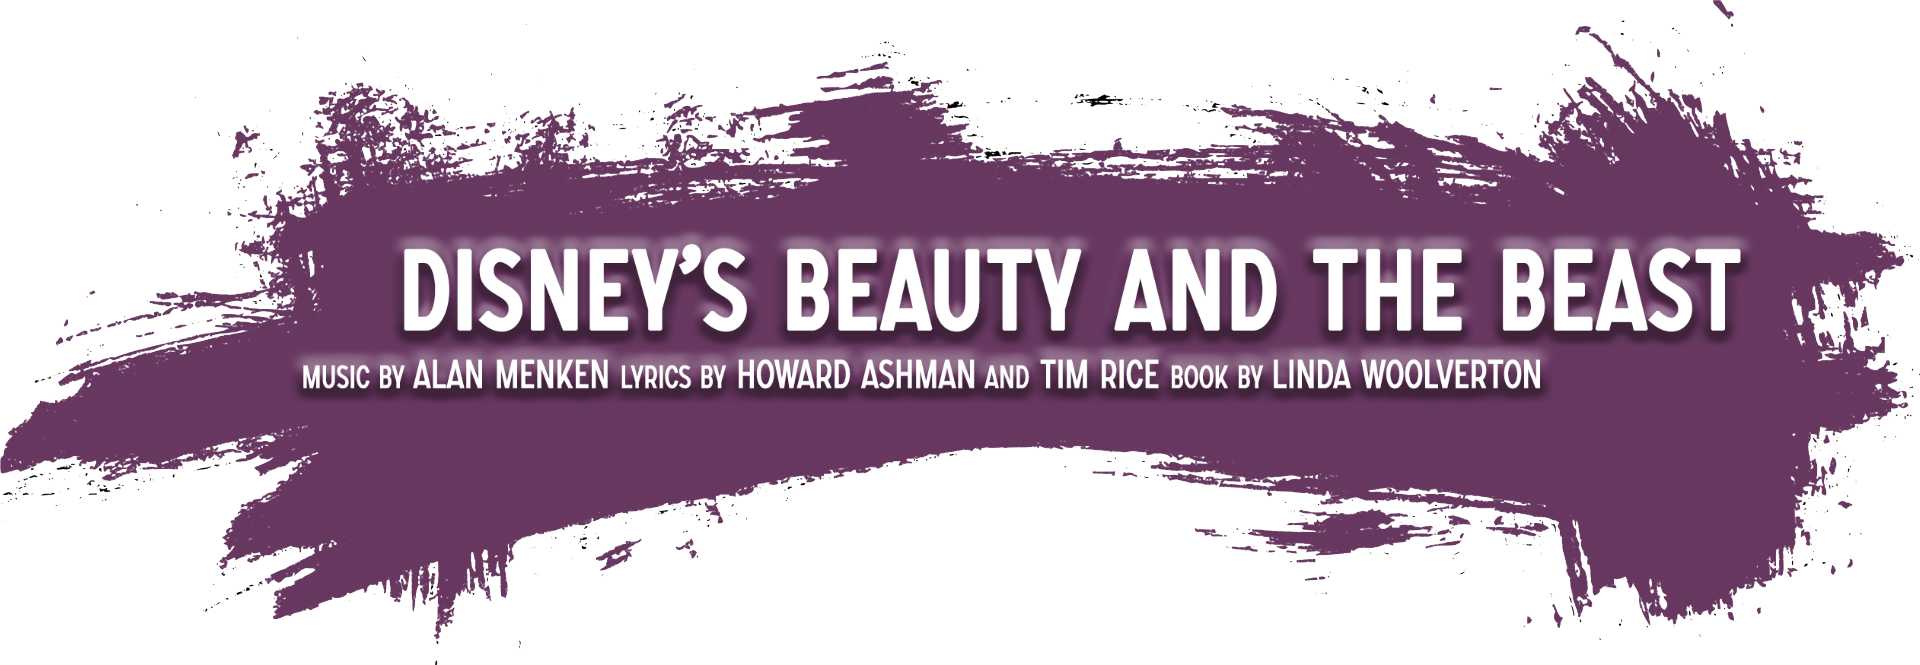 Header for "Beauty and the Beast"